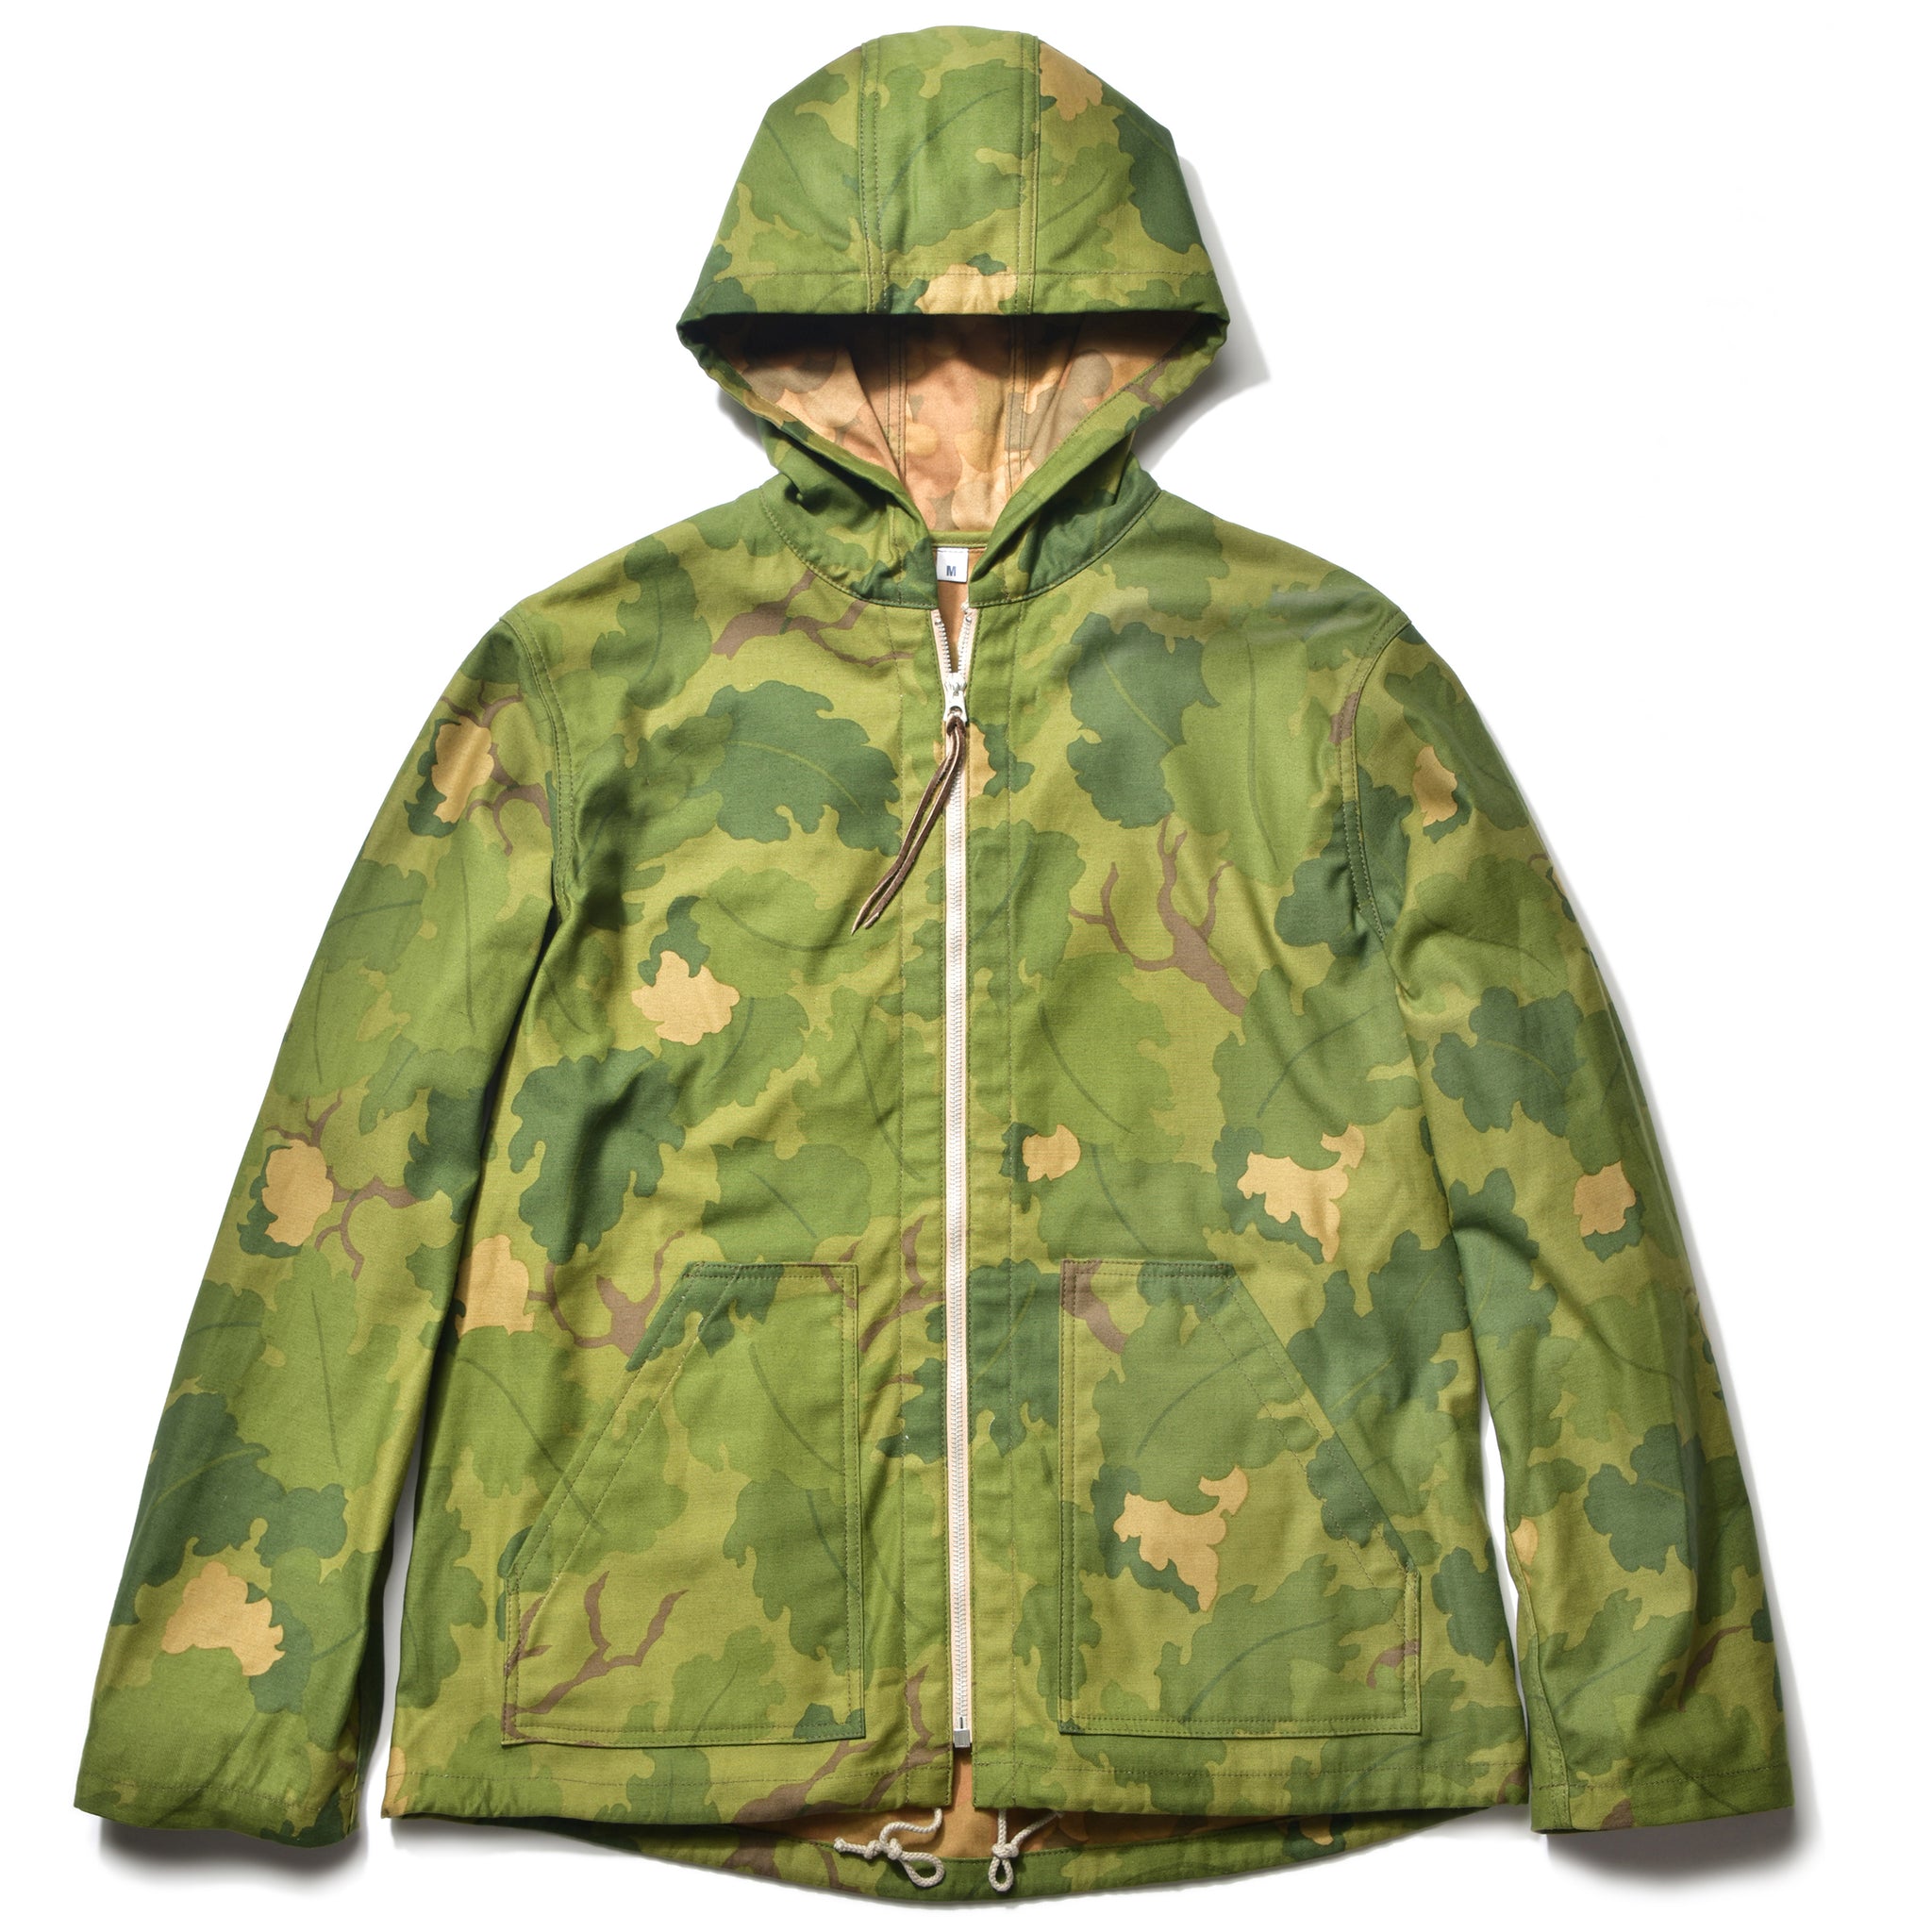 CAMOUFLAGE PARKA / MITCHELL PATTERN – The Real McCoy's